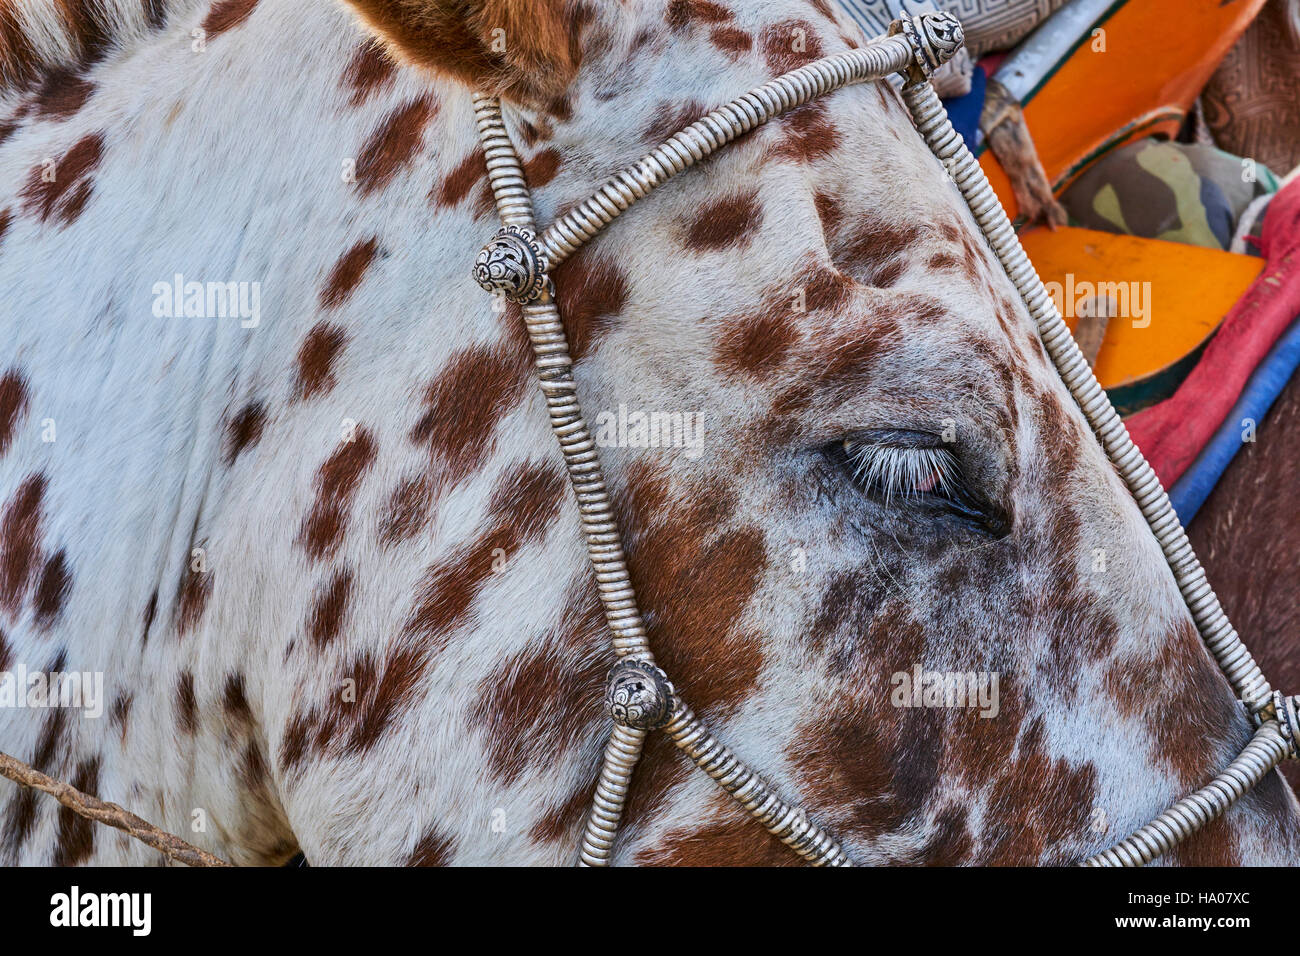 Mongolia, Bayankhongor province, Naadam, traditional festival, silver bridle and harness for the horse Stock Photo